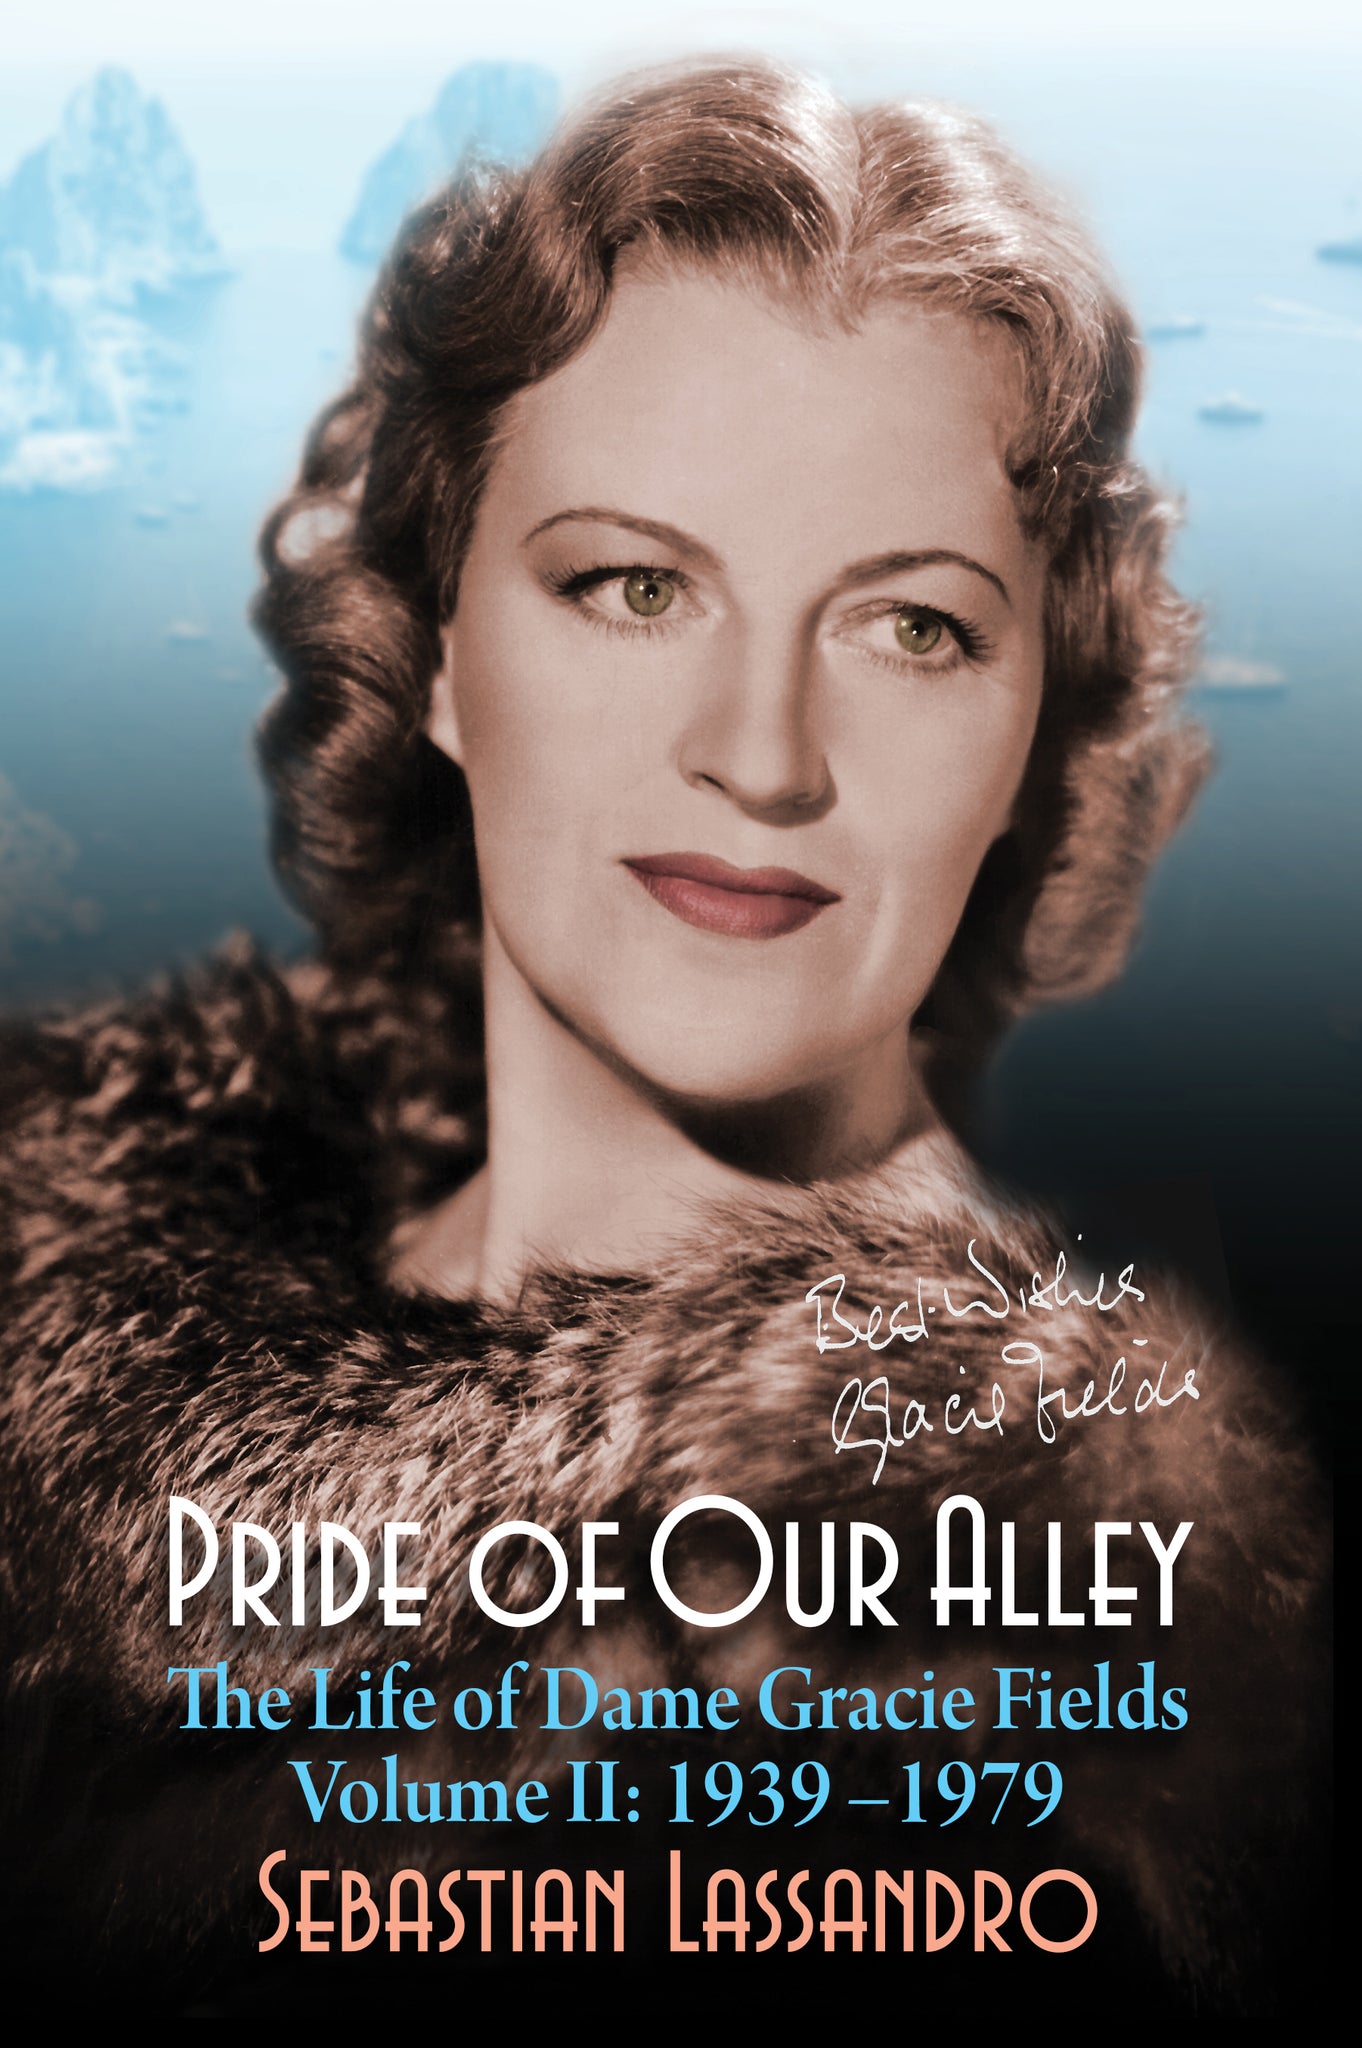 Pride of Our Alley: The Life of Dame Gracie Fields Volume II - 1939-1979 (ebook) - BearManor Manor